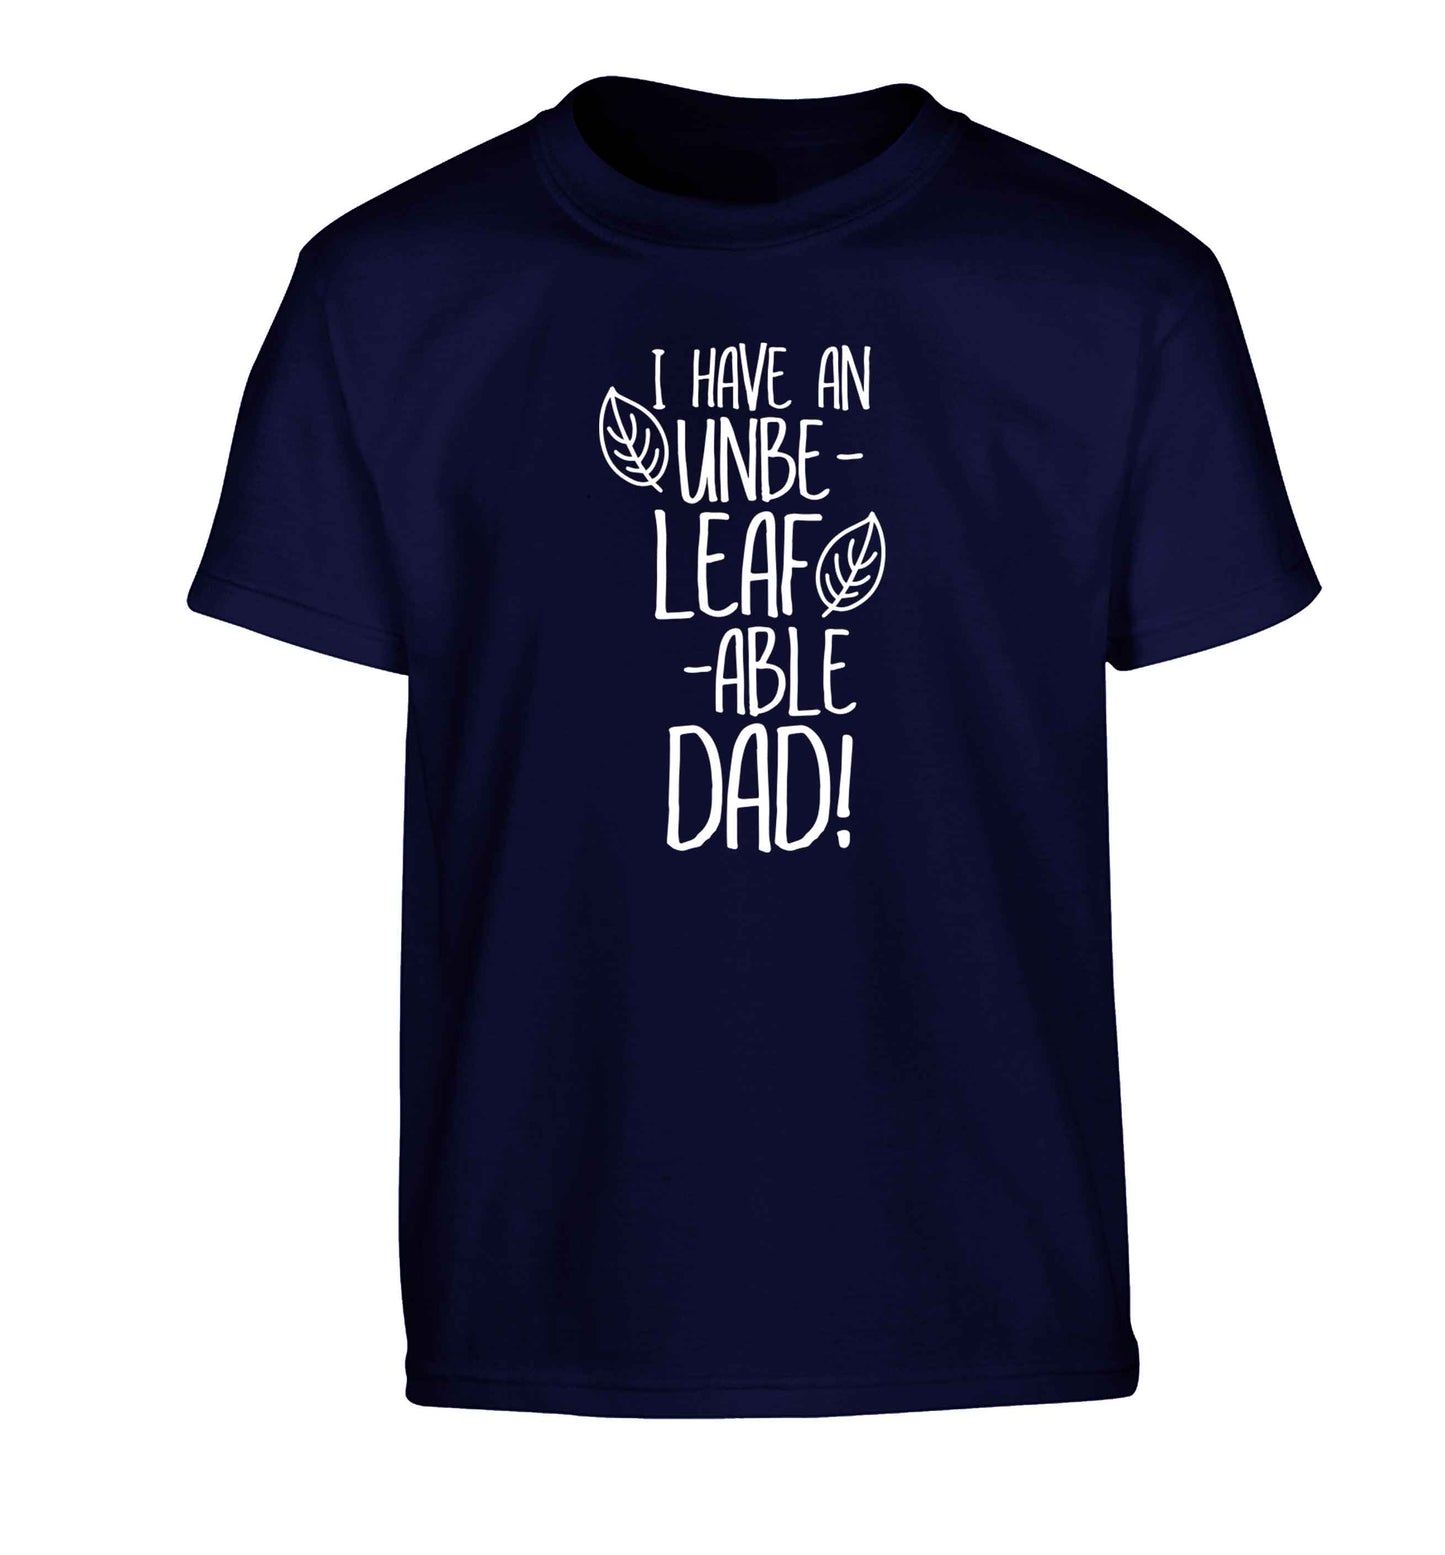 I have an unbe-leaf-able dad Children's navy Tshirt 12-13 Years